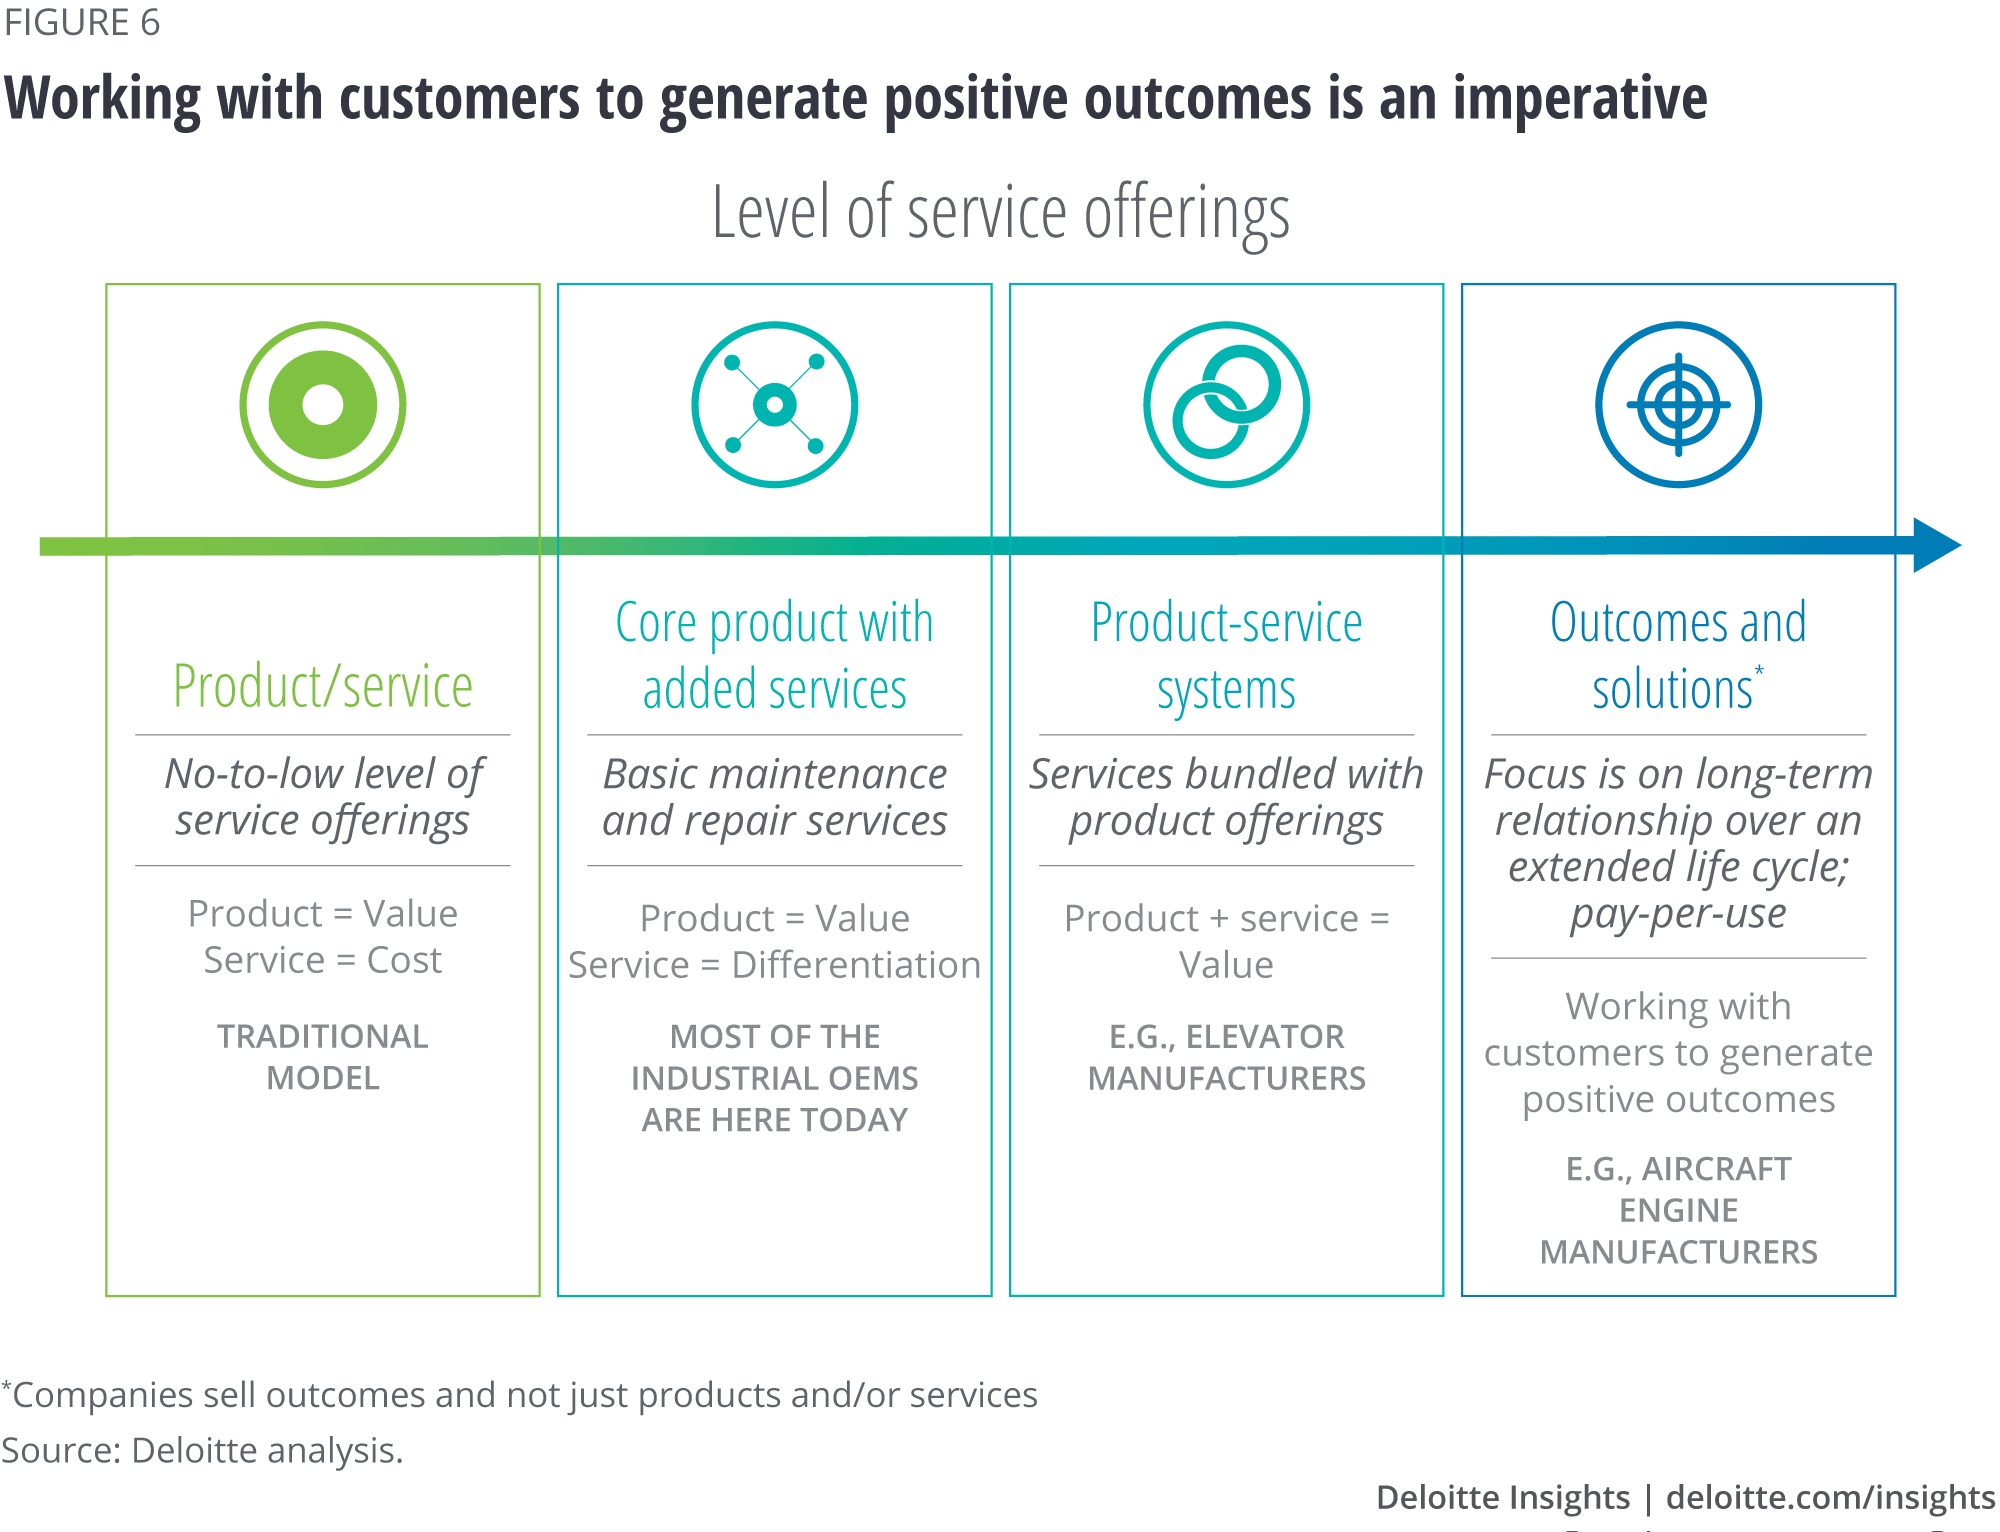 Working with customers to generate positive outcomes is an imperative